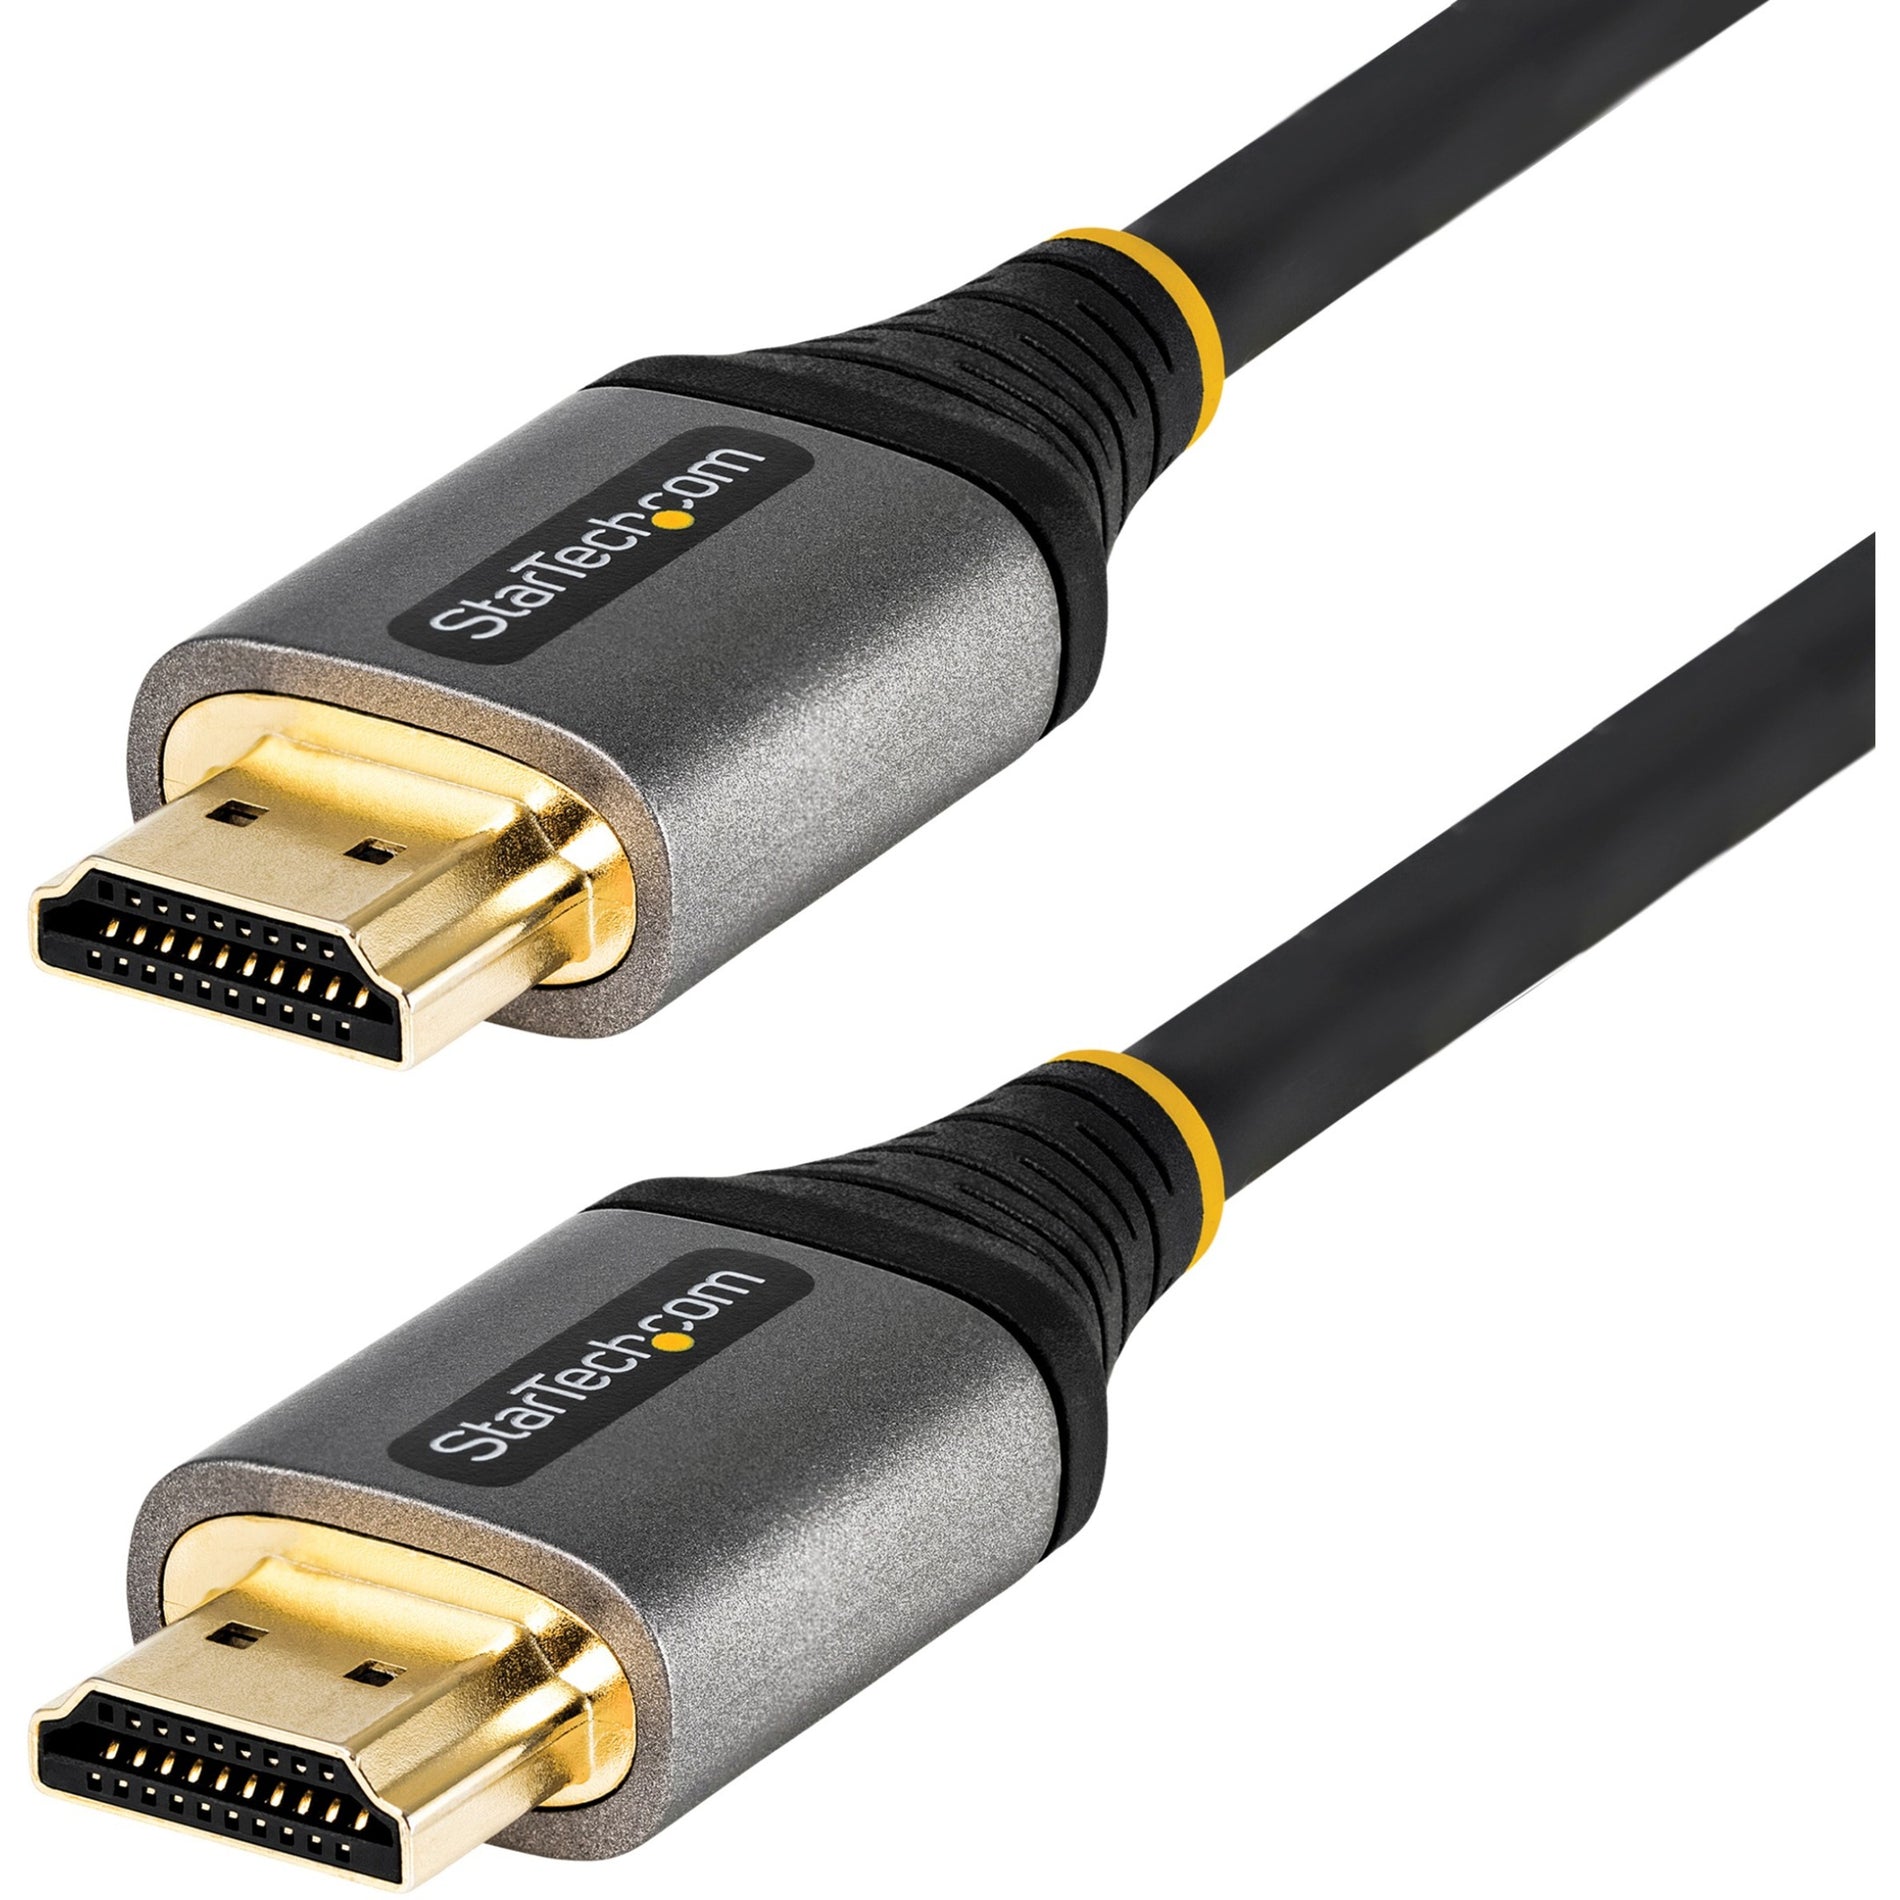 StarTech.com HDMM21V1M Ultra High Speed HDMI Cable, 3ft/1m, 8K 60Hz/4K 120Hz HDR10+, Certified 48Gbps